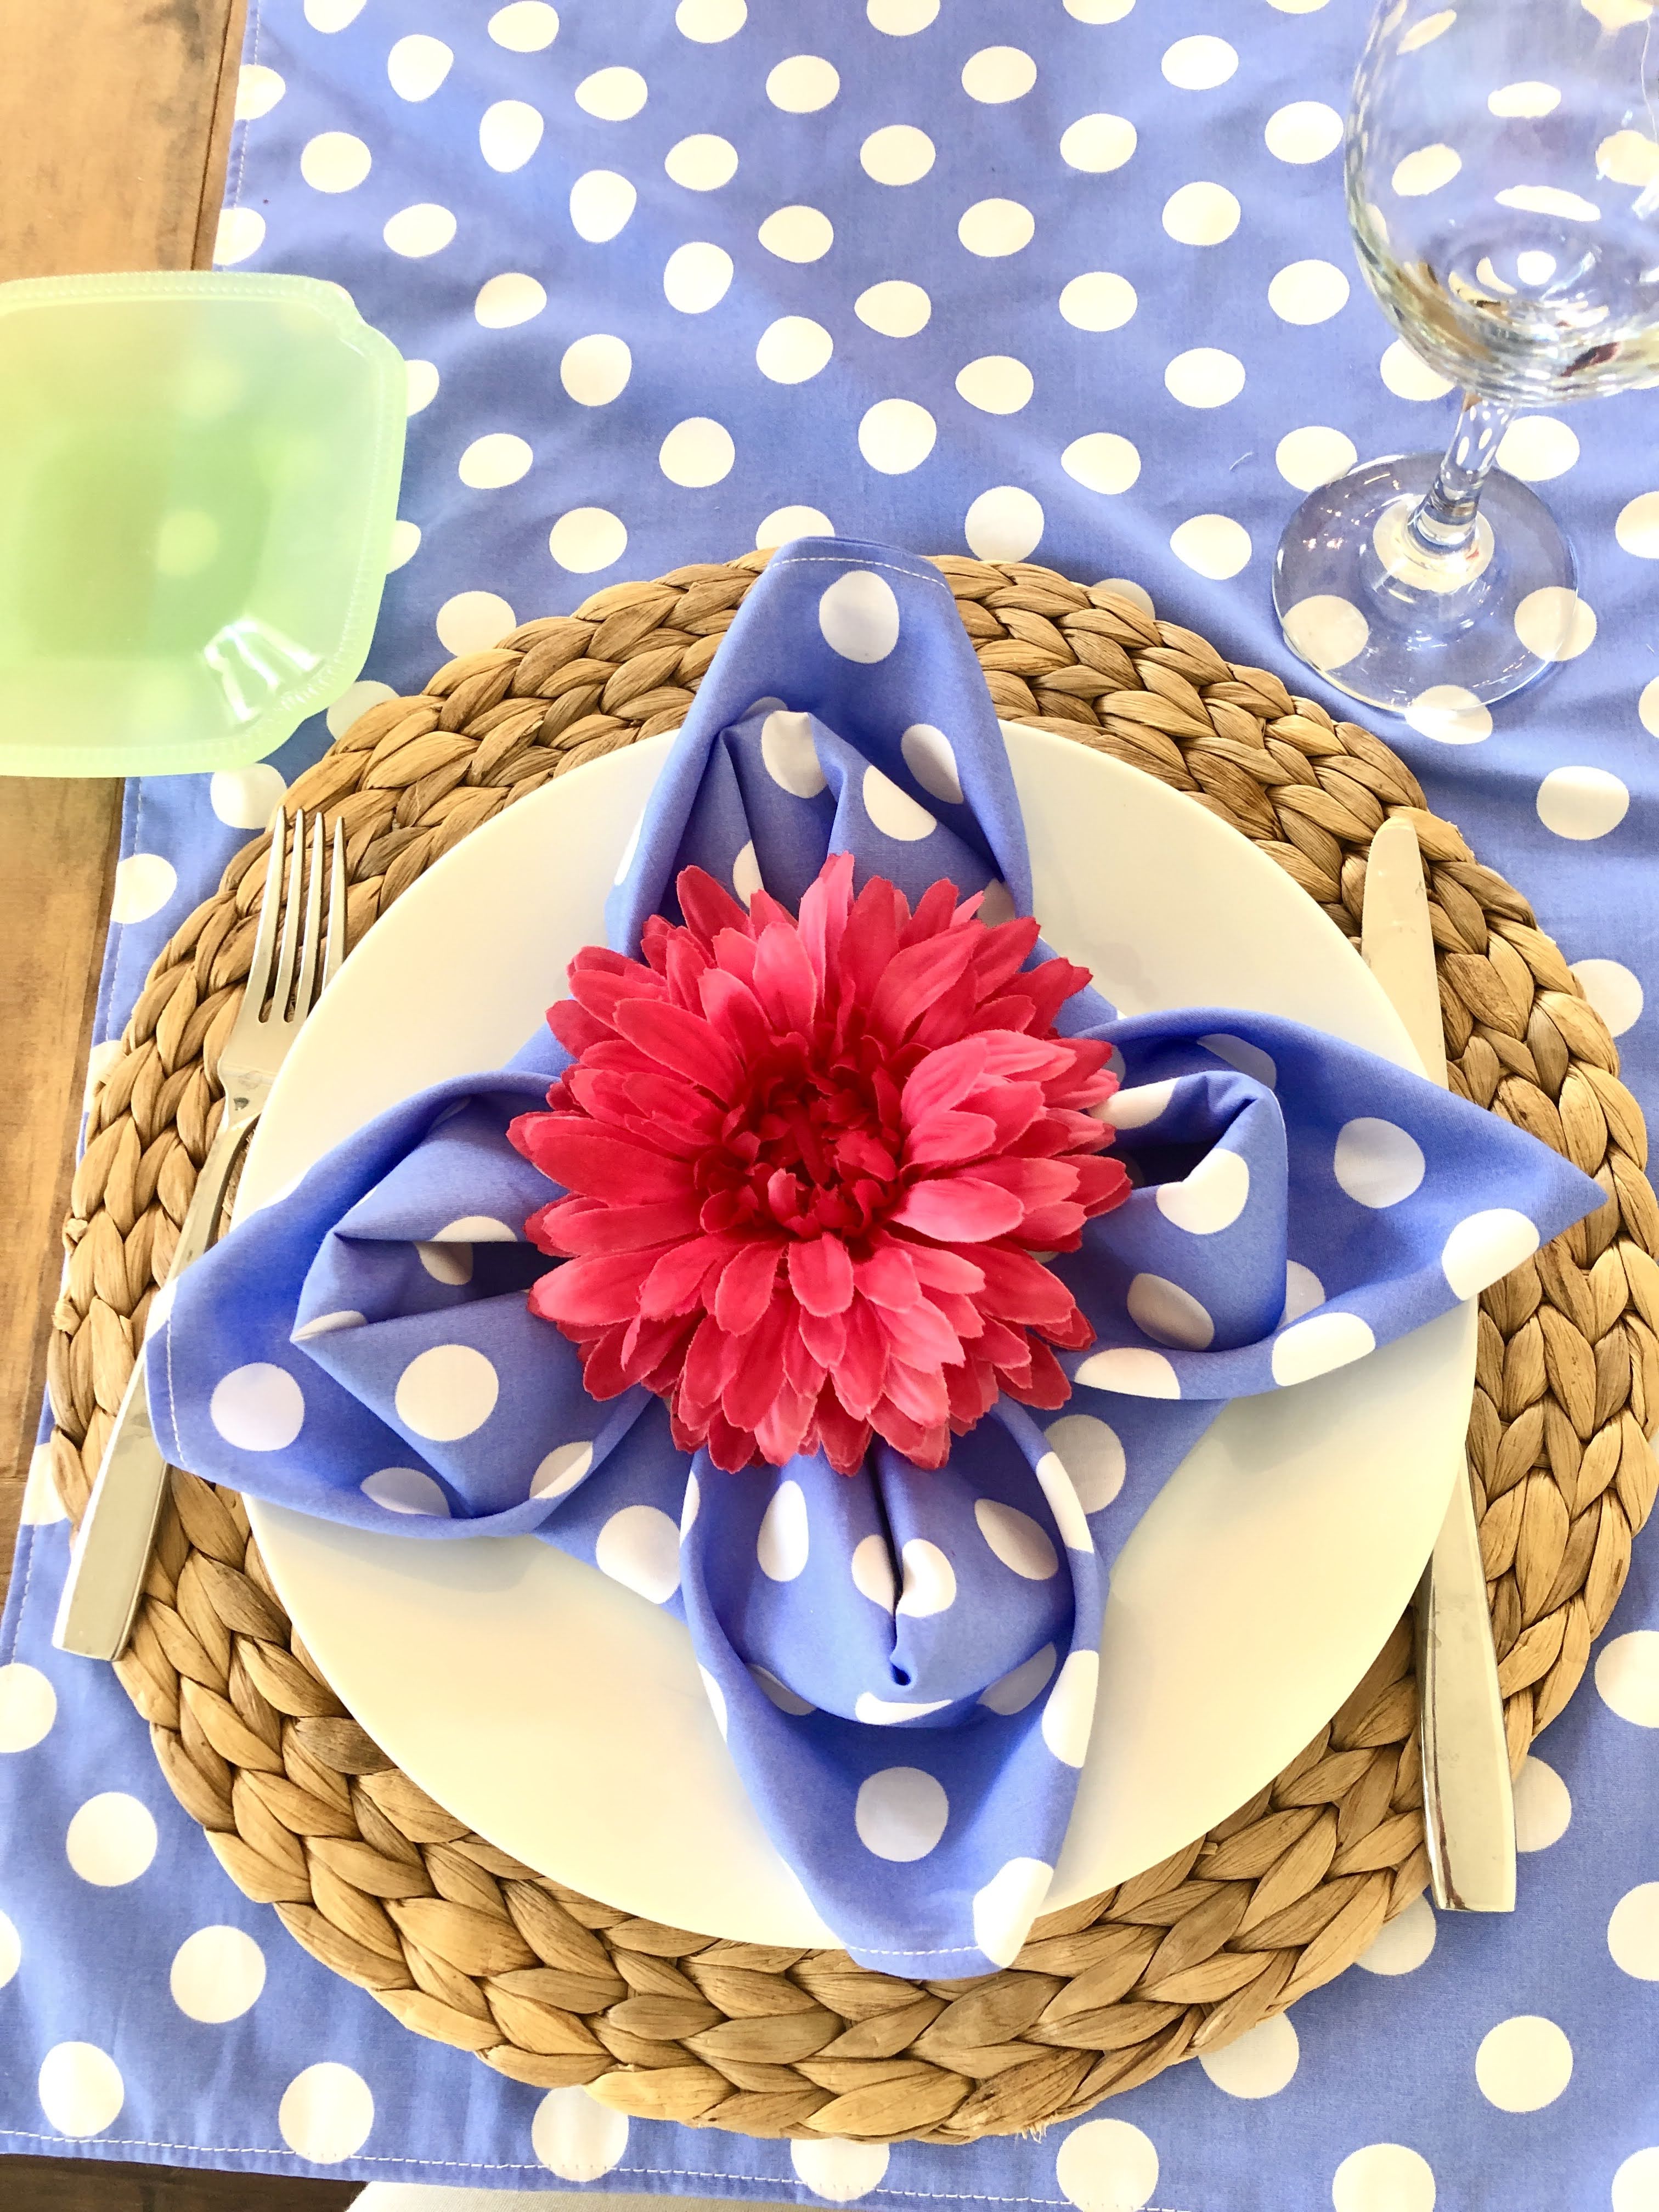 How to set an Easter table? With periwinkle blue polka dot napkins and matching runner. 